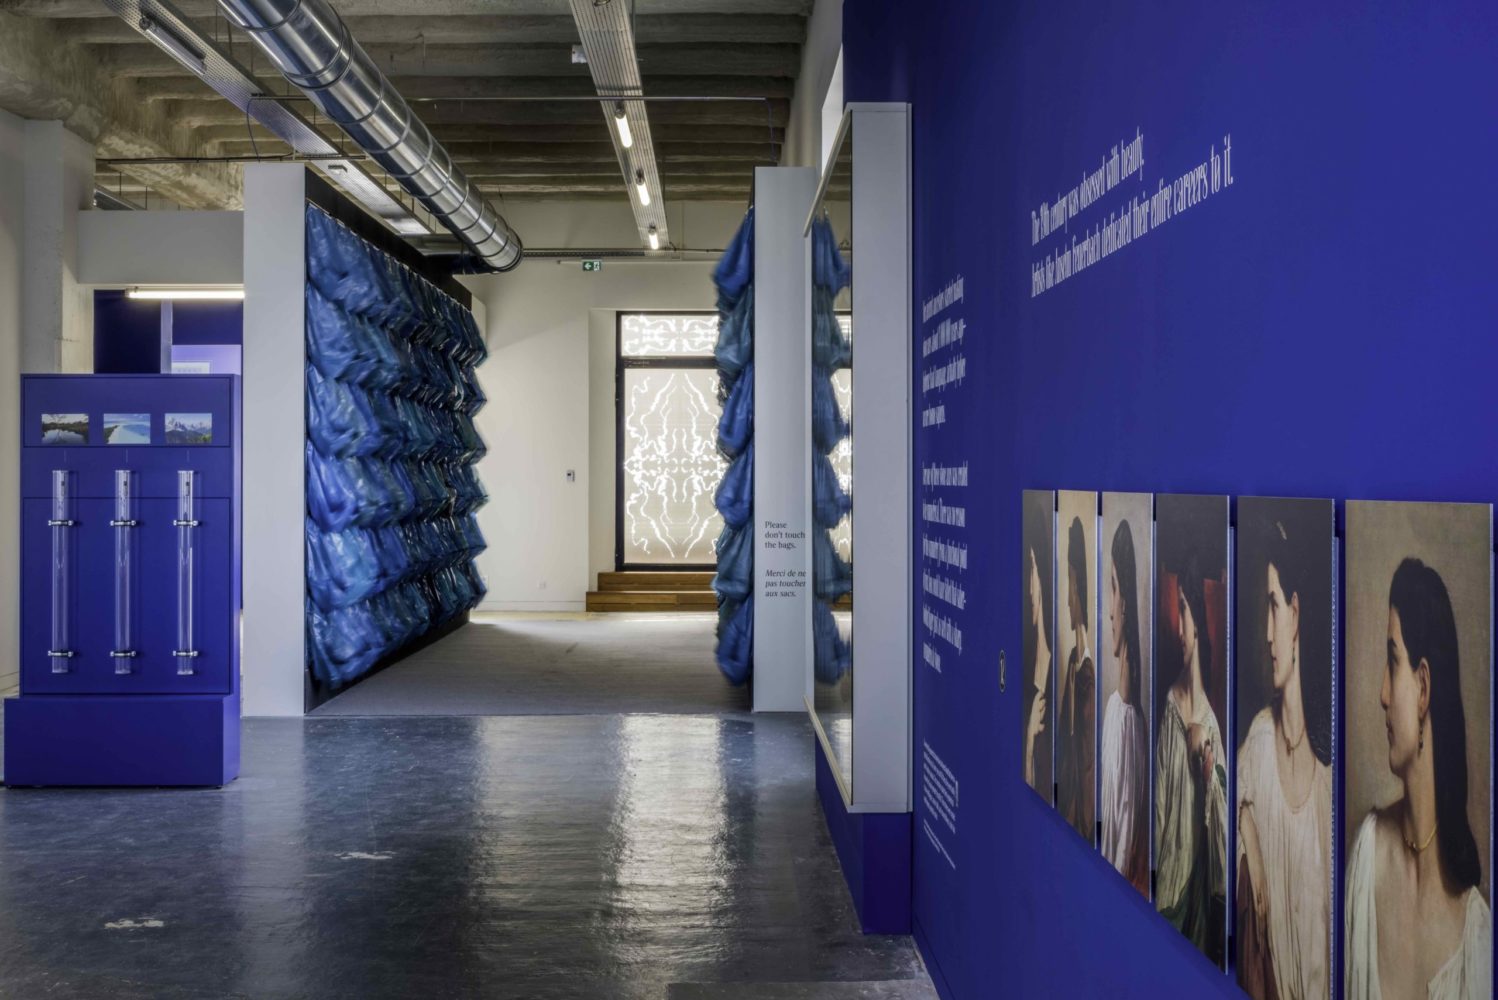 Installation view of “Sagmeister & Walsh: Beauty,” at Fondation D’Entreprise Martell